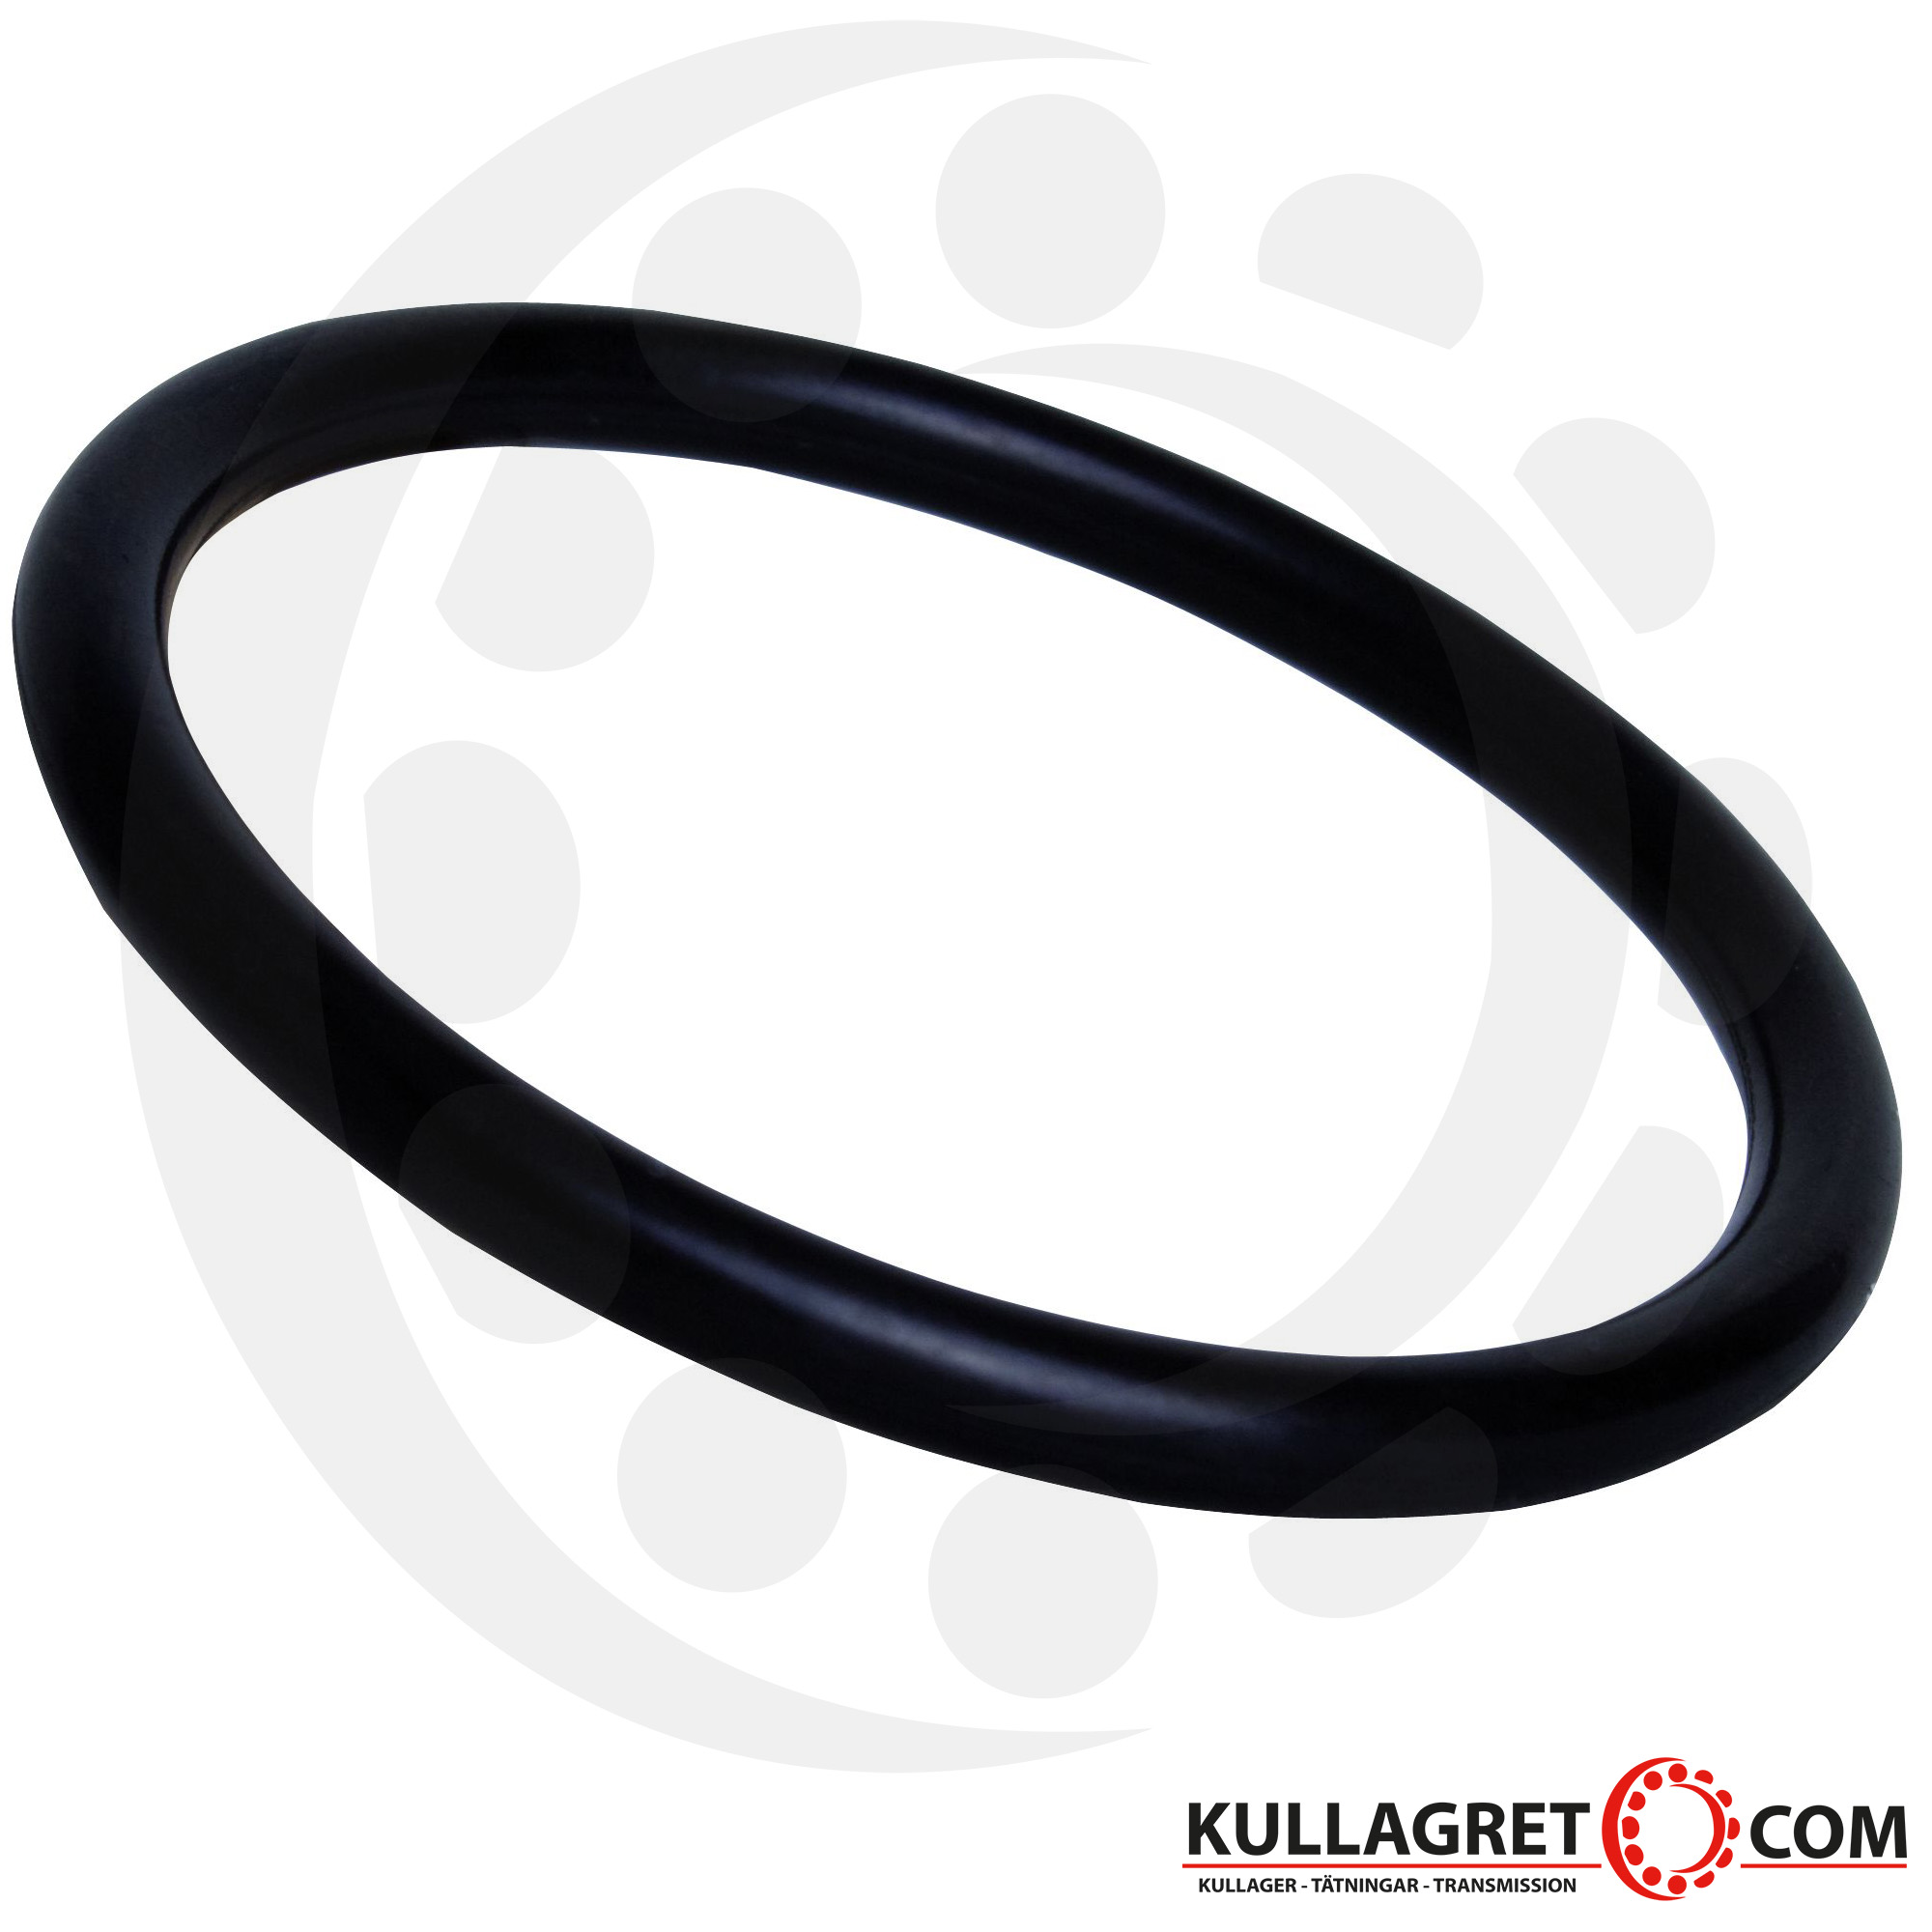 15 St. O-Ring Nullring Rundring 11,0 x 1,0 mm EPDM 70 Shore A schwarz 